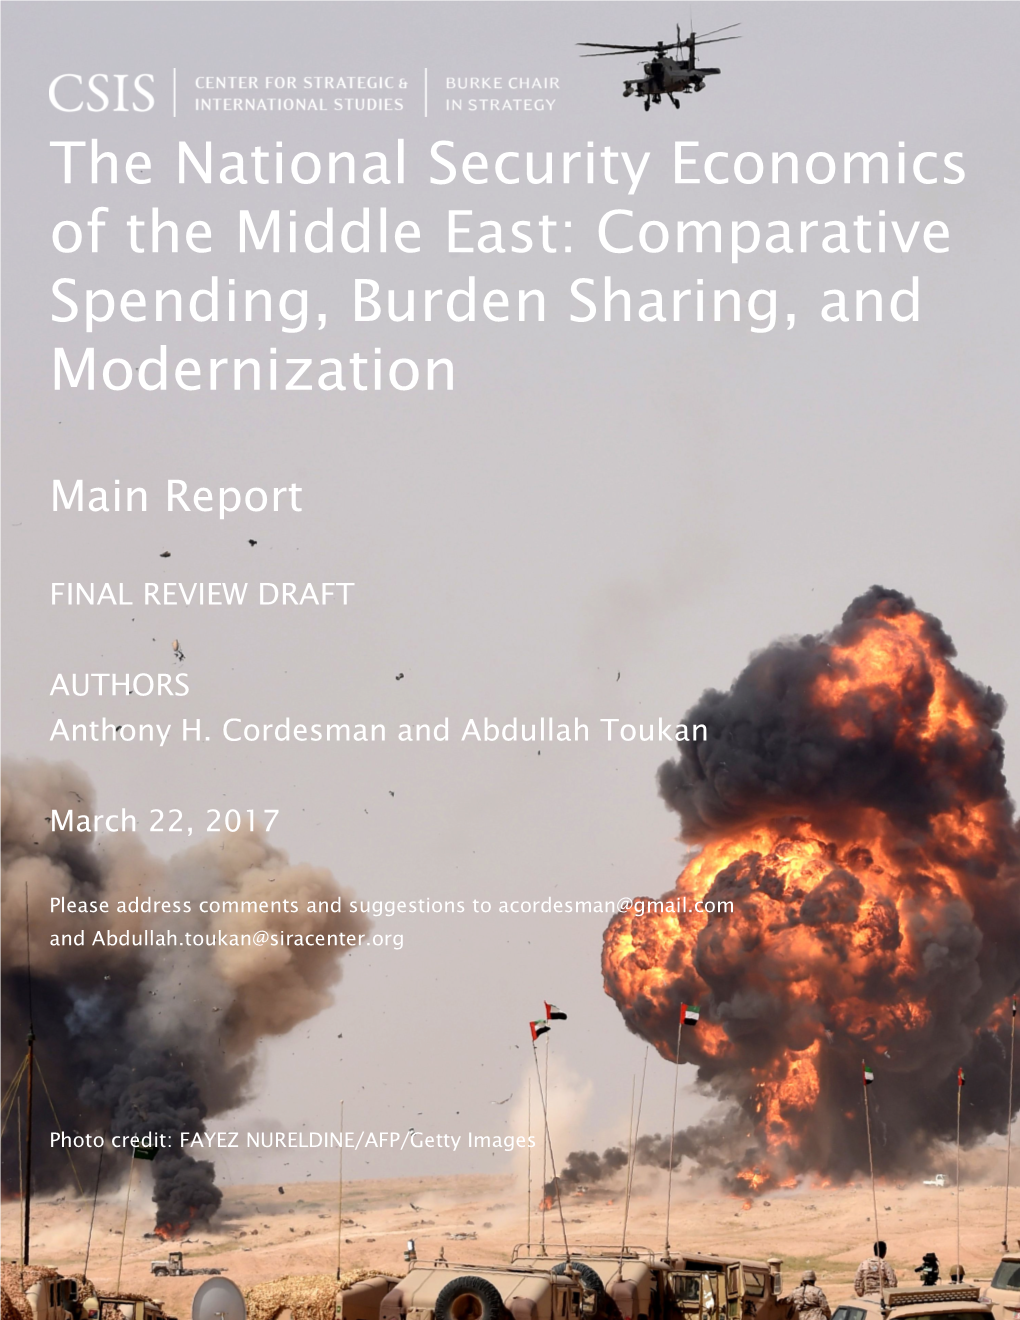 The National Security Economics of the Middle East: Comparative Spending, Burden Sharing, and Modernization